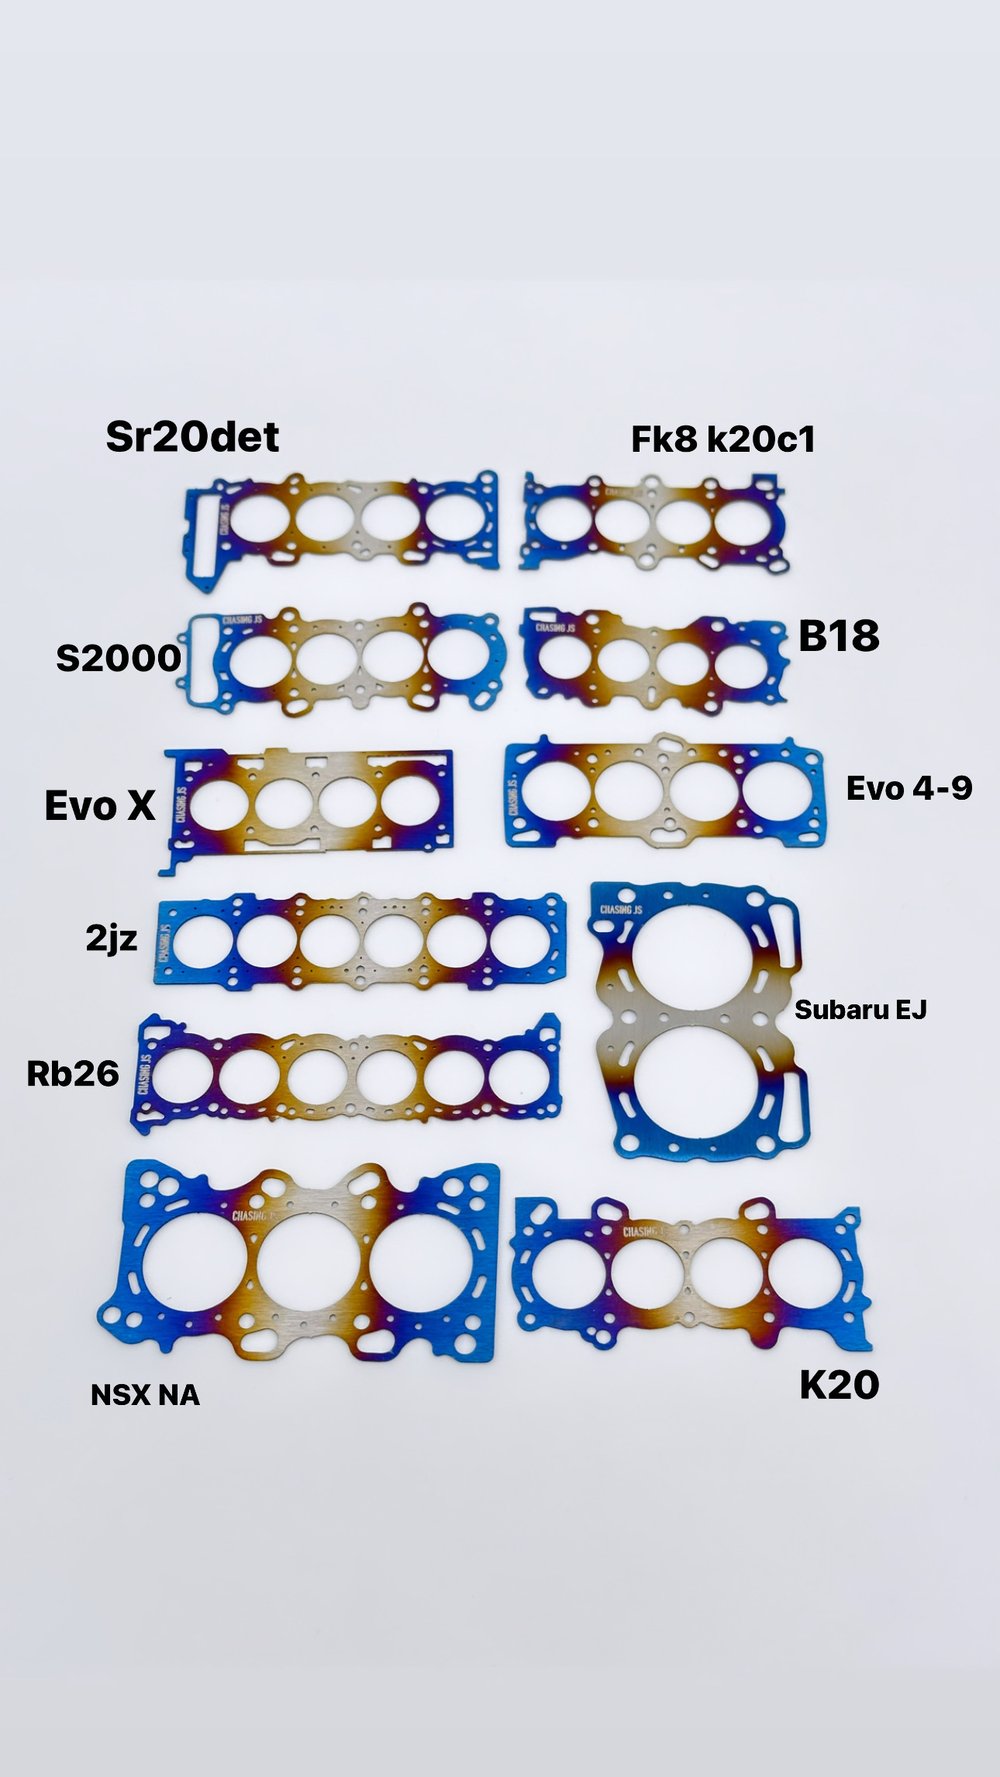 Miniature of a Head Gasket for Volvo B6 (94-06) Keychain Stainless Steel  brushed – DisagrEE